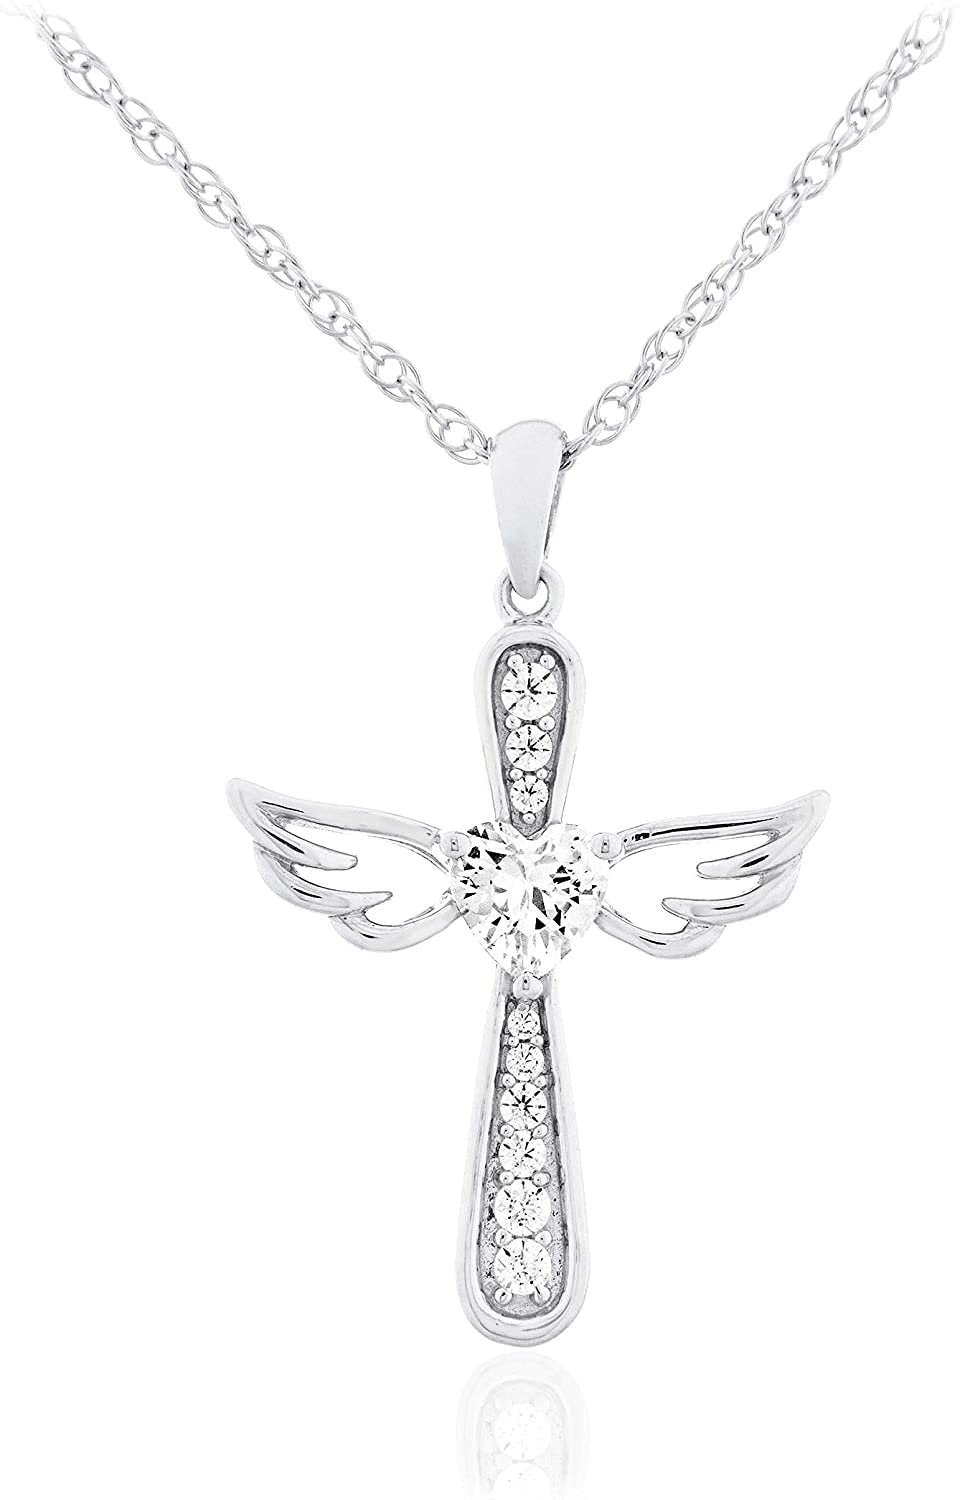 .925 Sterling Silver Heart Cut White Cubic Zirconia Heart Flared Cross with Angel Wings Pendant Necklace with Rope Chain - 20”